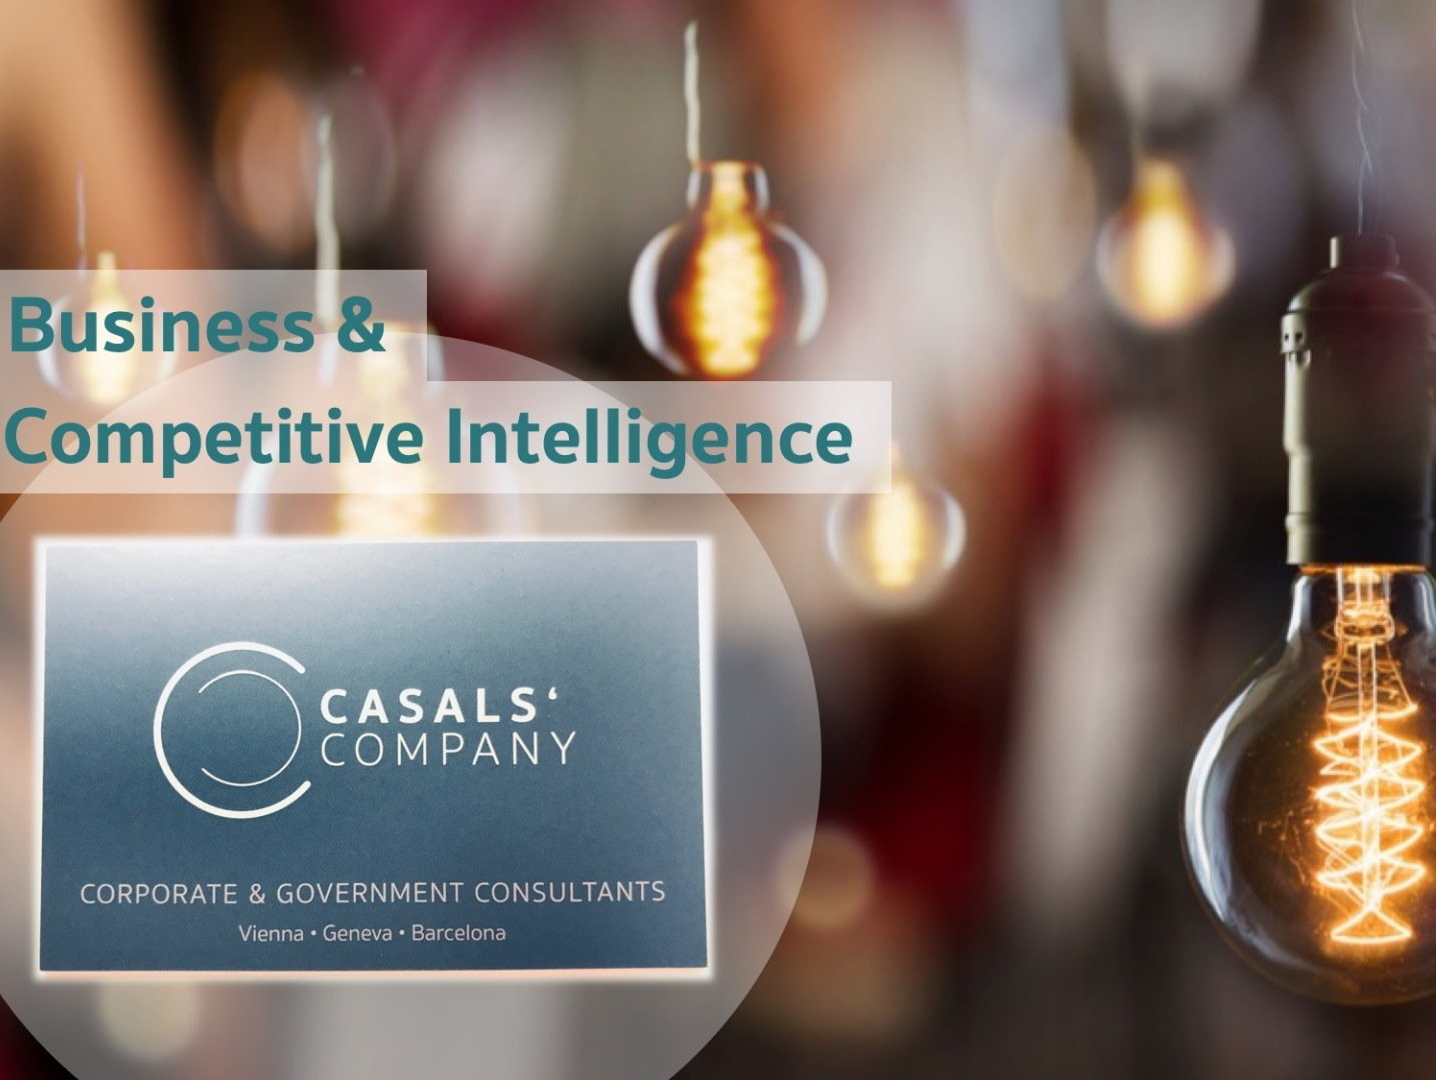 Business & Competitive Intelligence